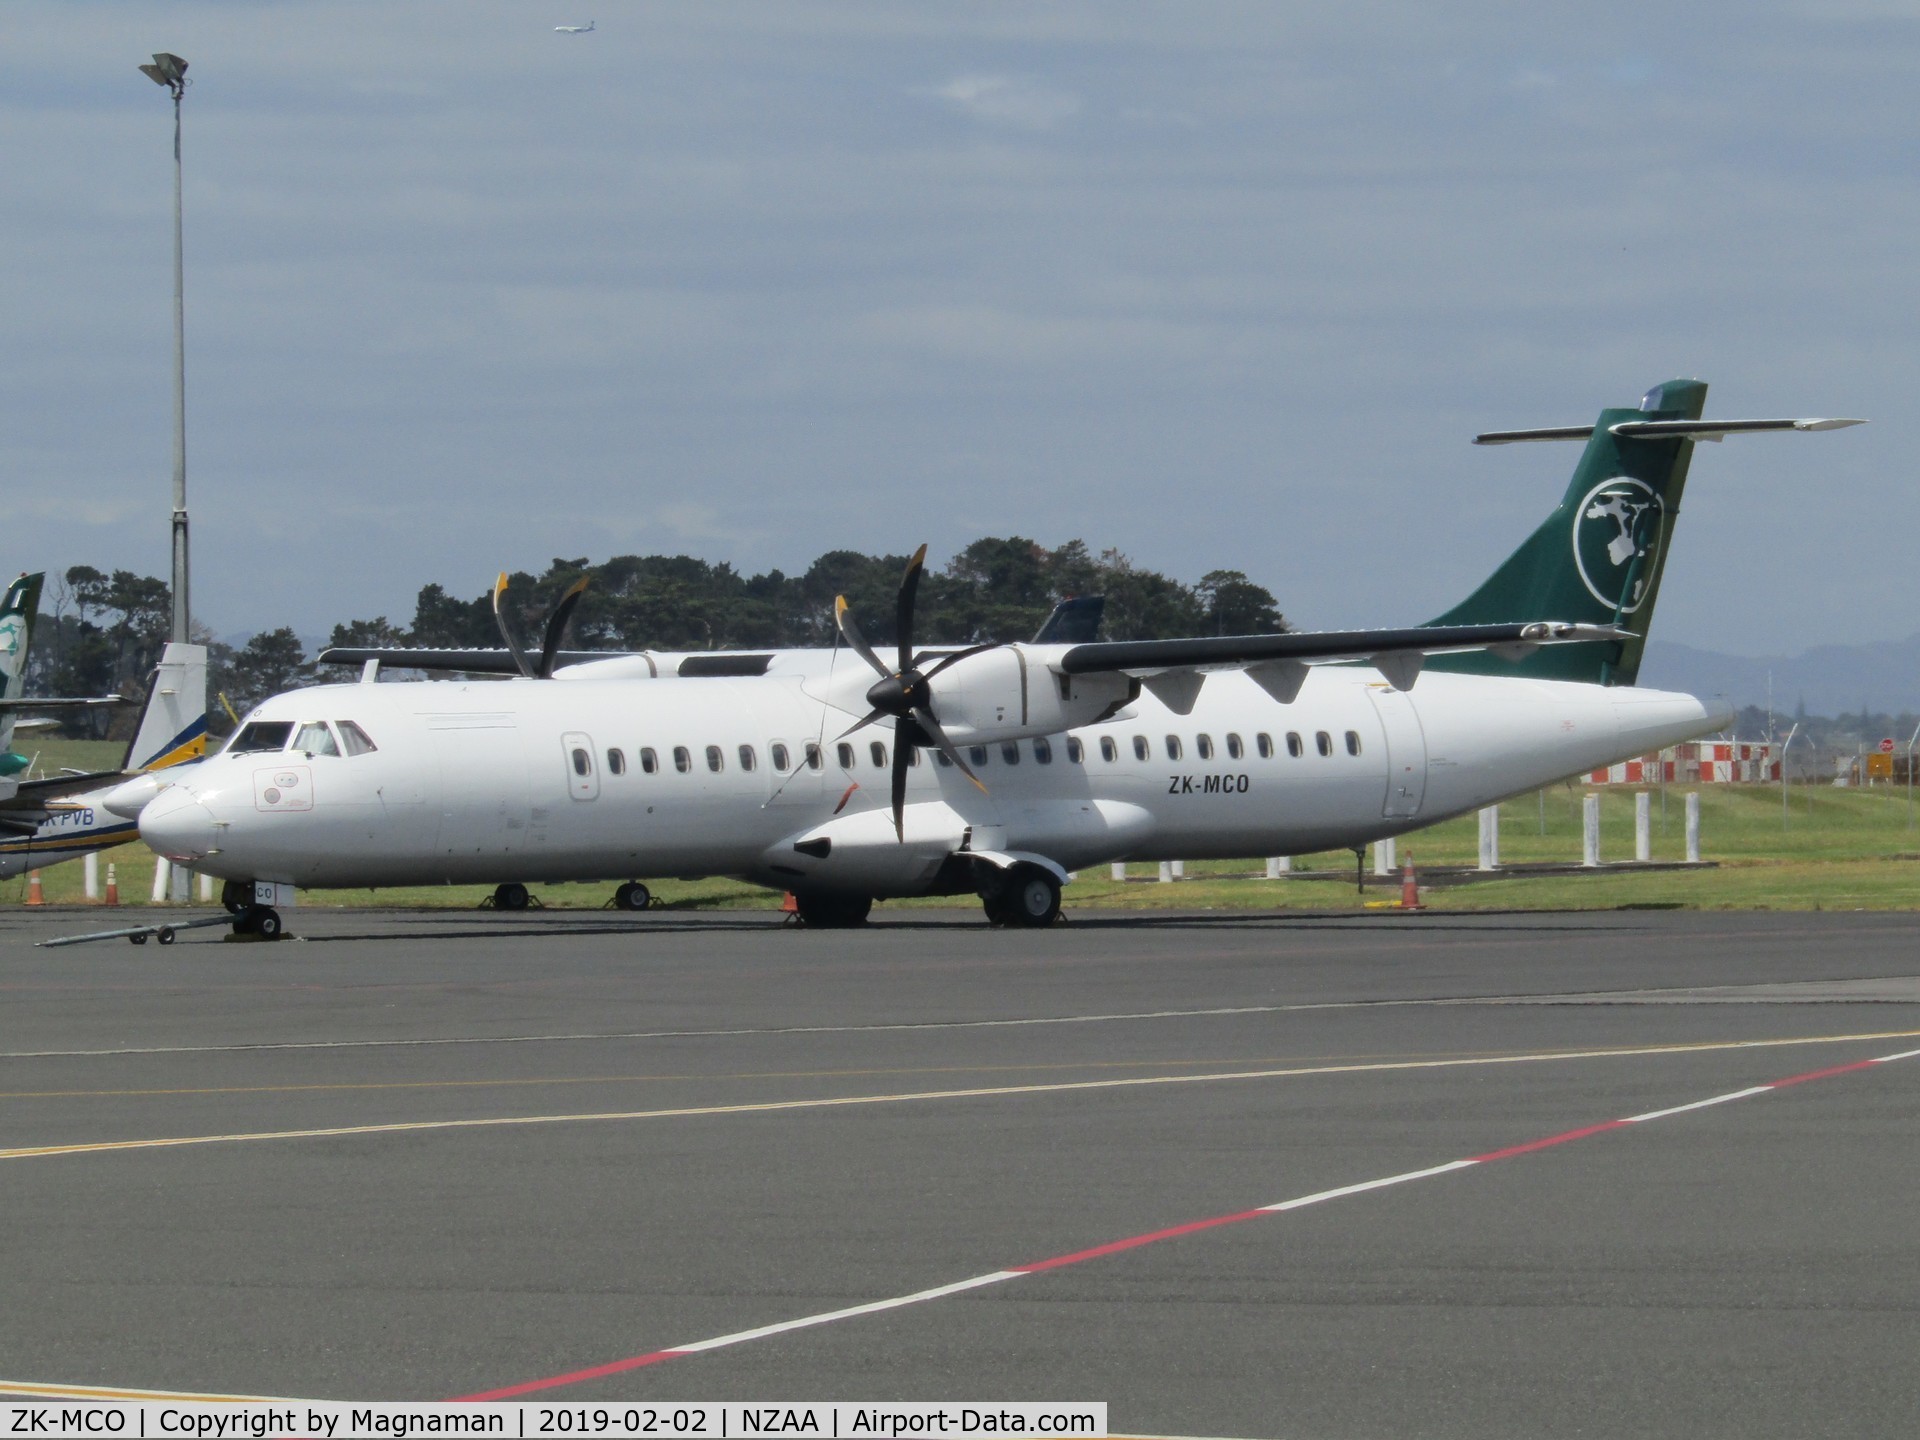 ZK-MCO, 1999 ATR 72-212A C/N 628, latest addition to Air Chathams fleet following retirement from Air New Zealand